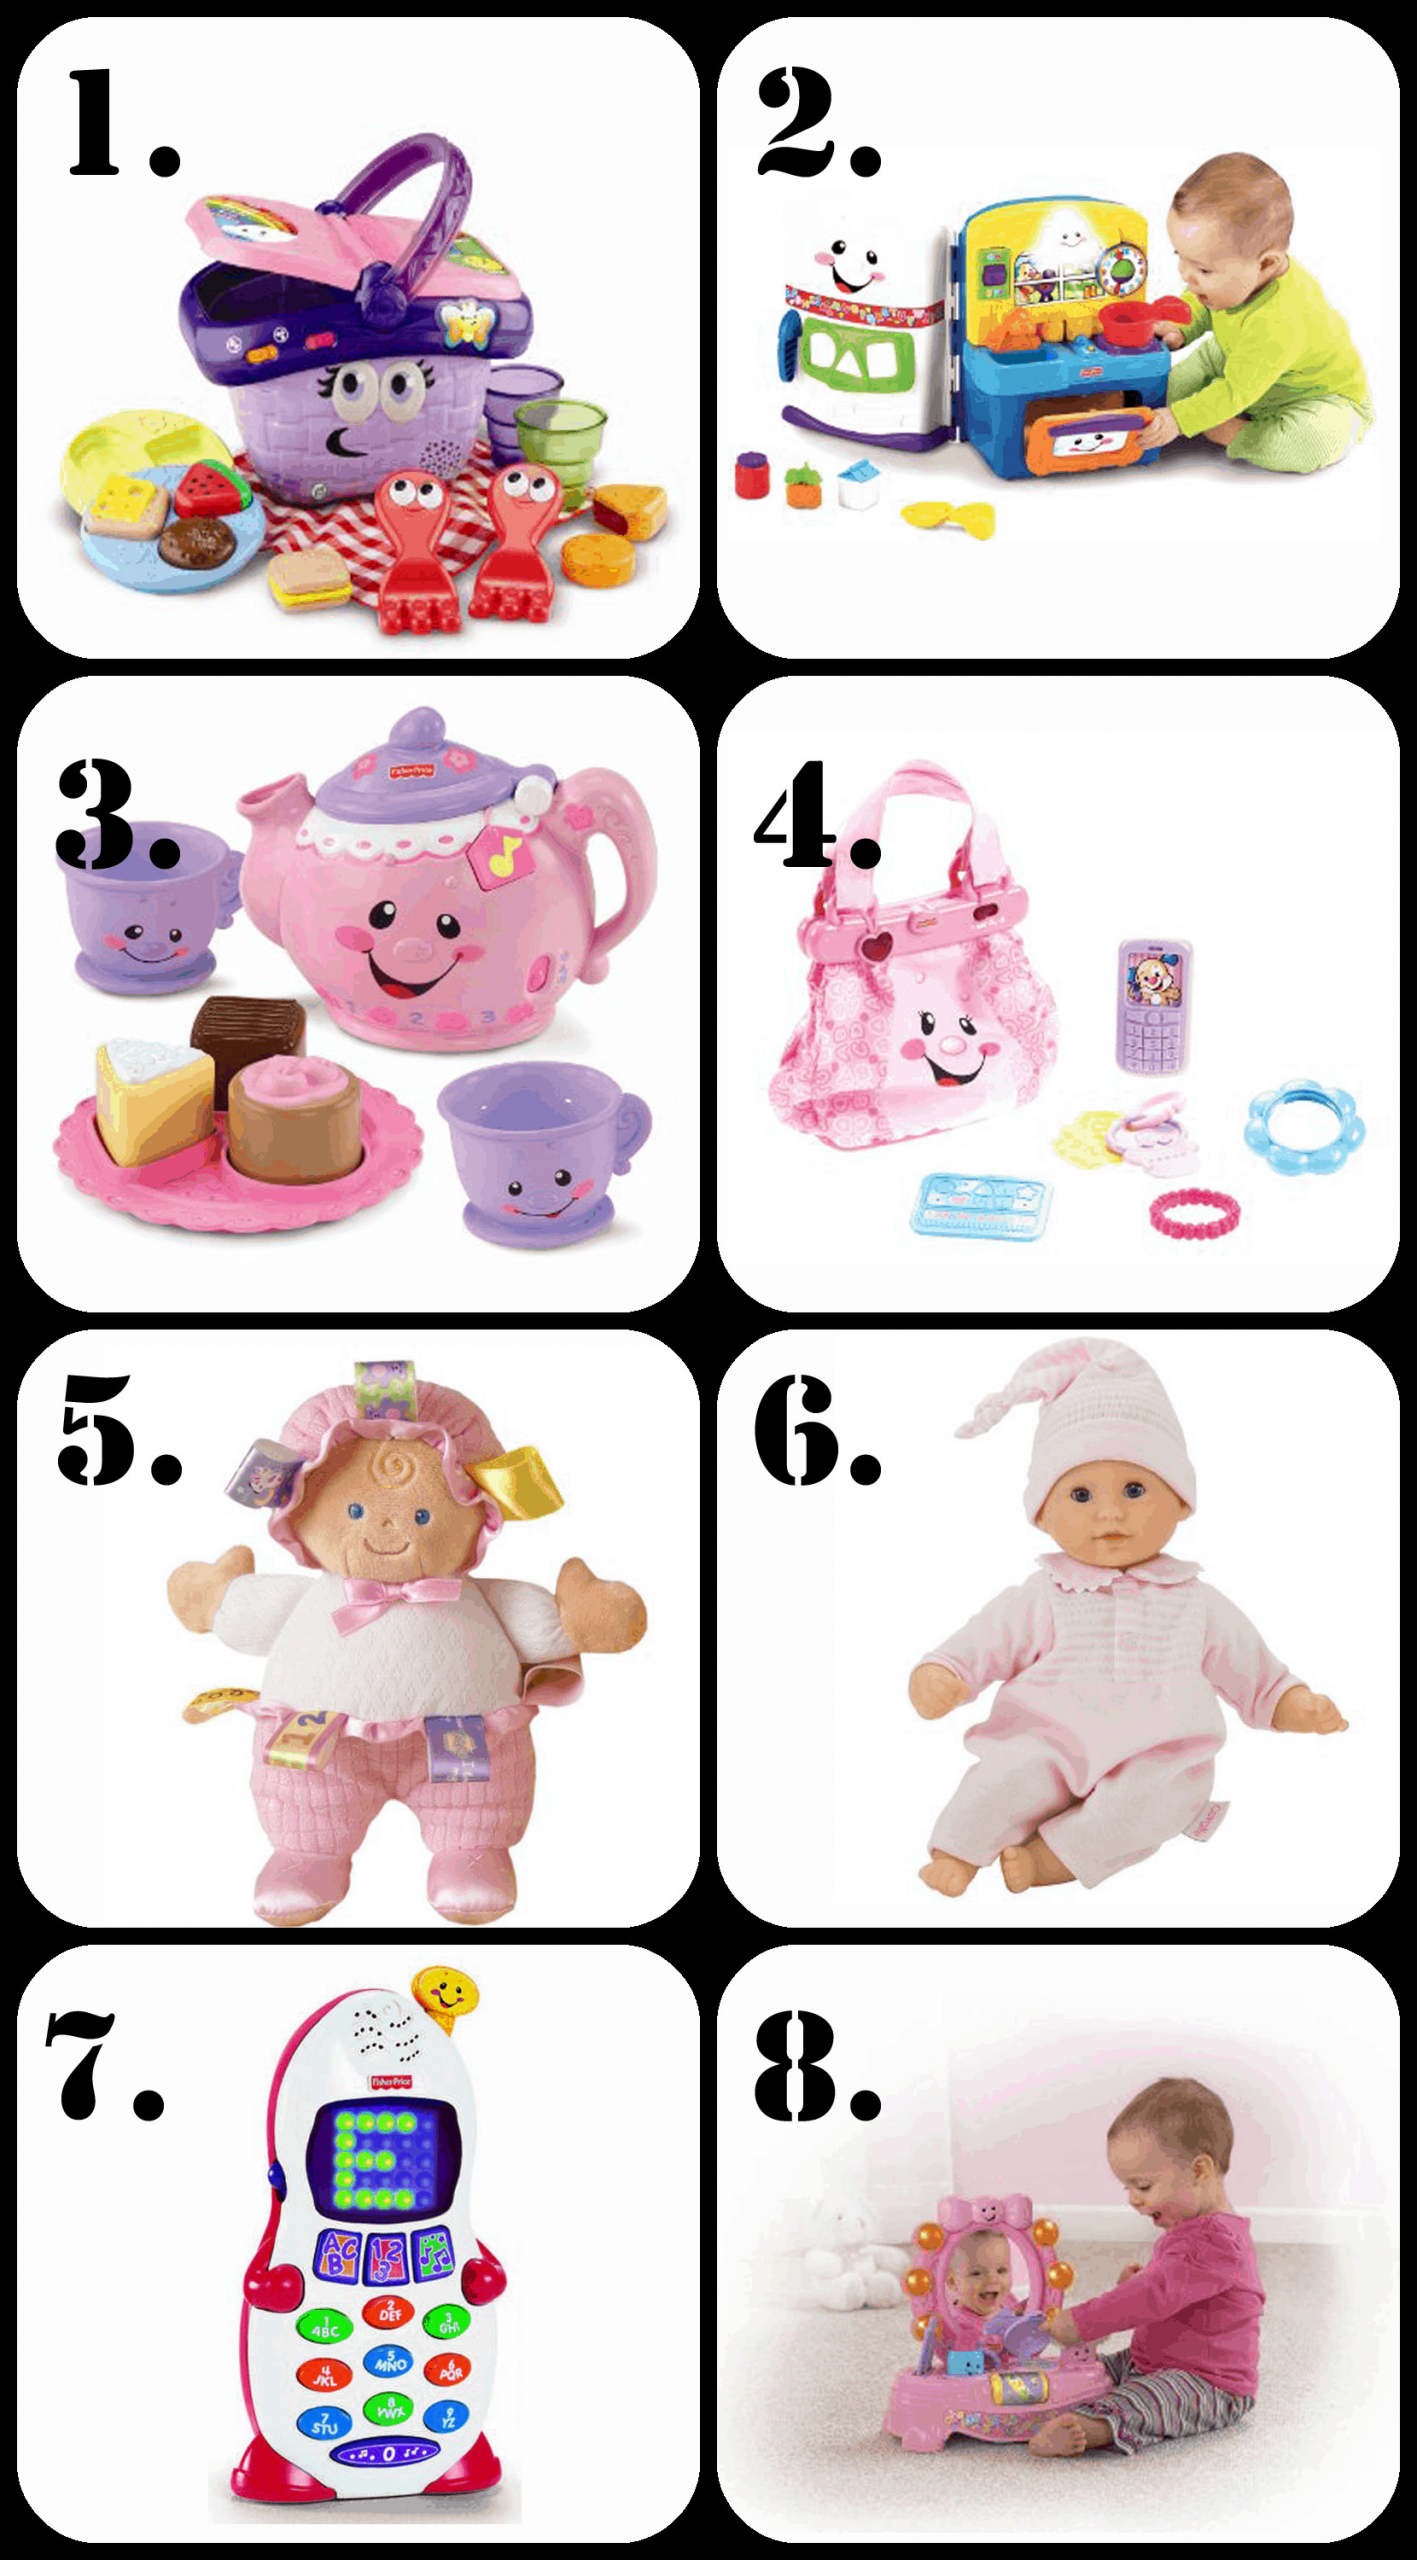 Birthday Gifts For 1 Year Old
 The Ultimate List of Gift Ideas for a 1 Year Old Girl